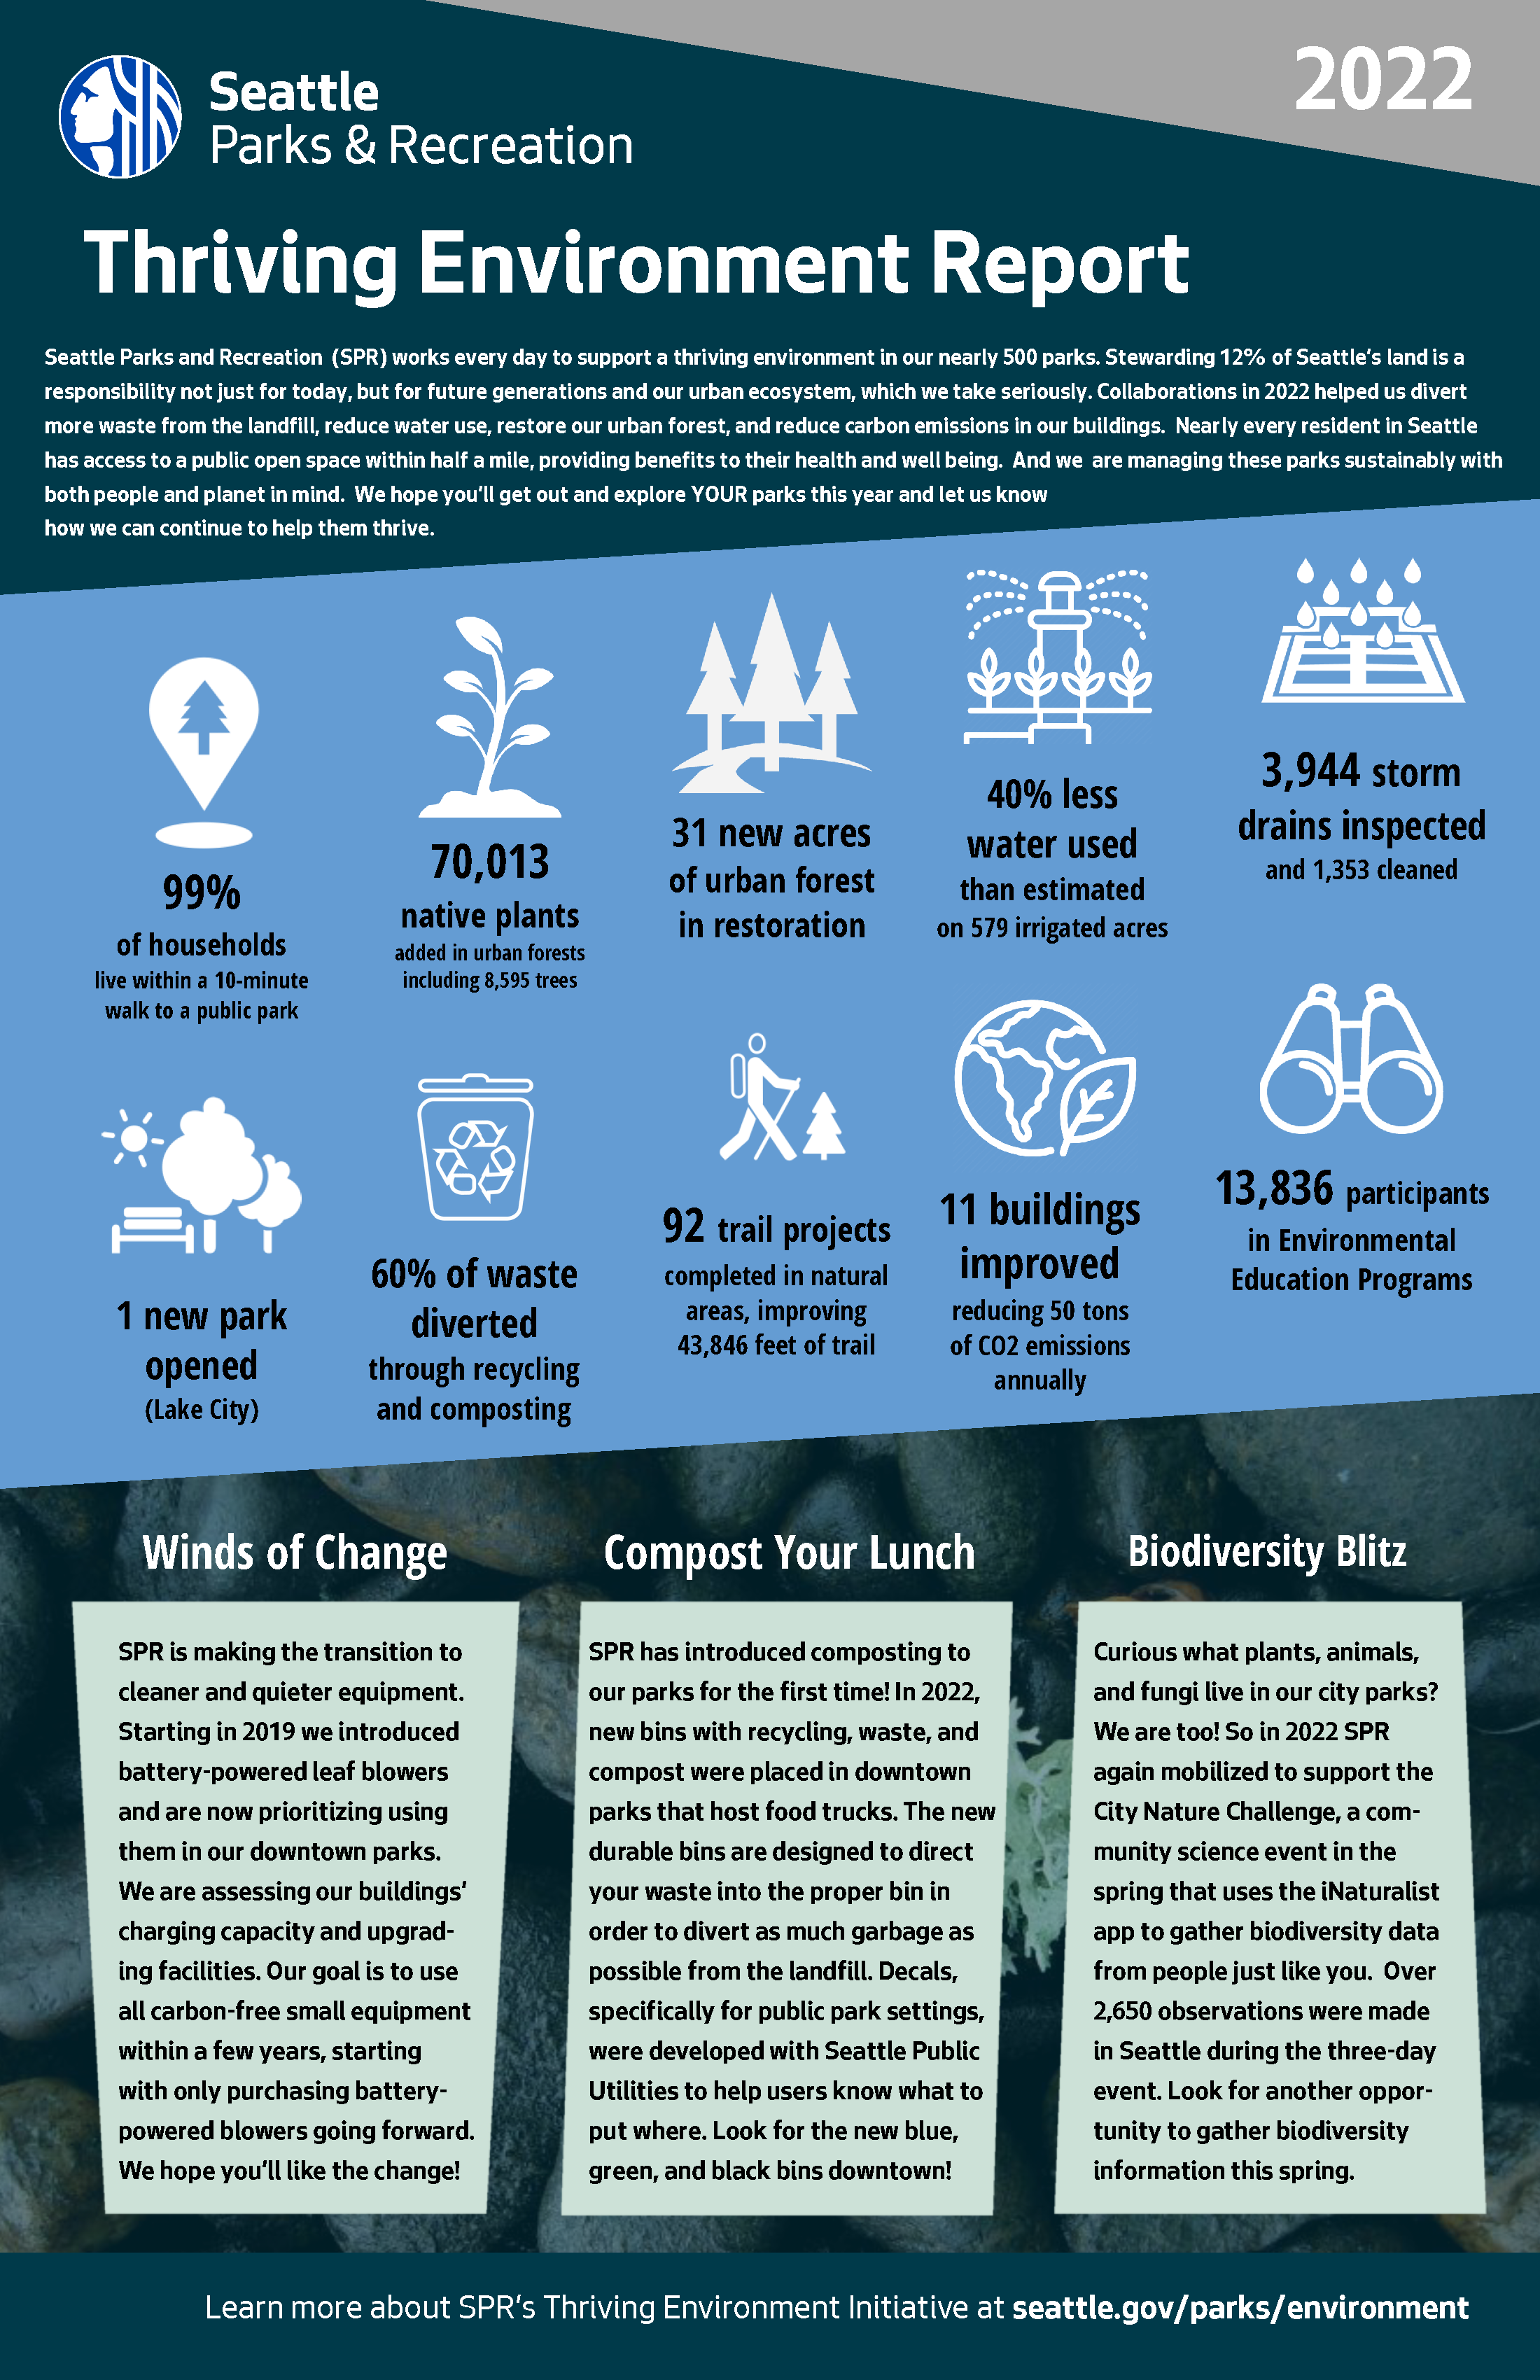 Graphic of 2022 Thriving Environment efforts and outcomes